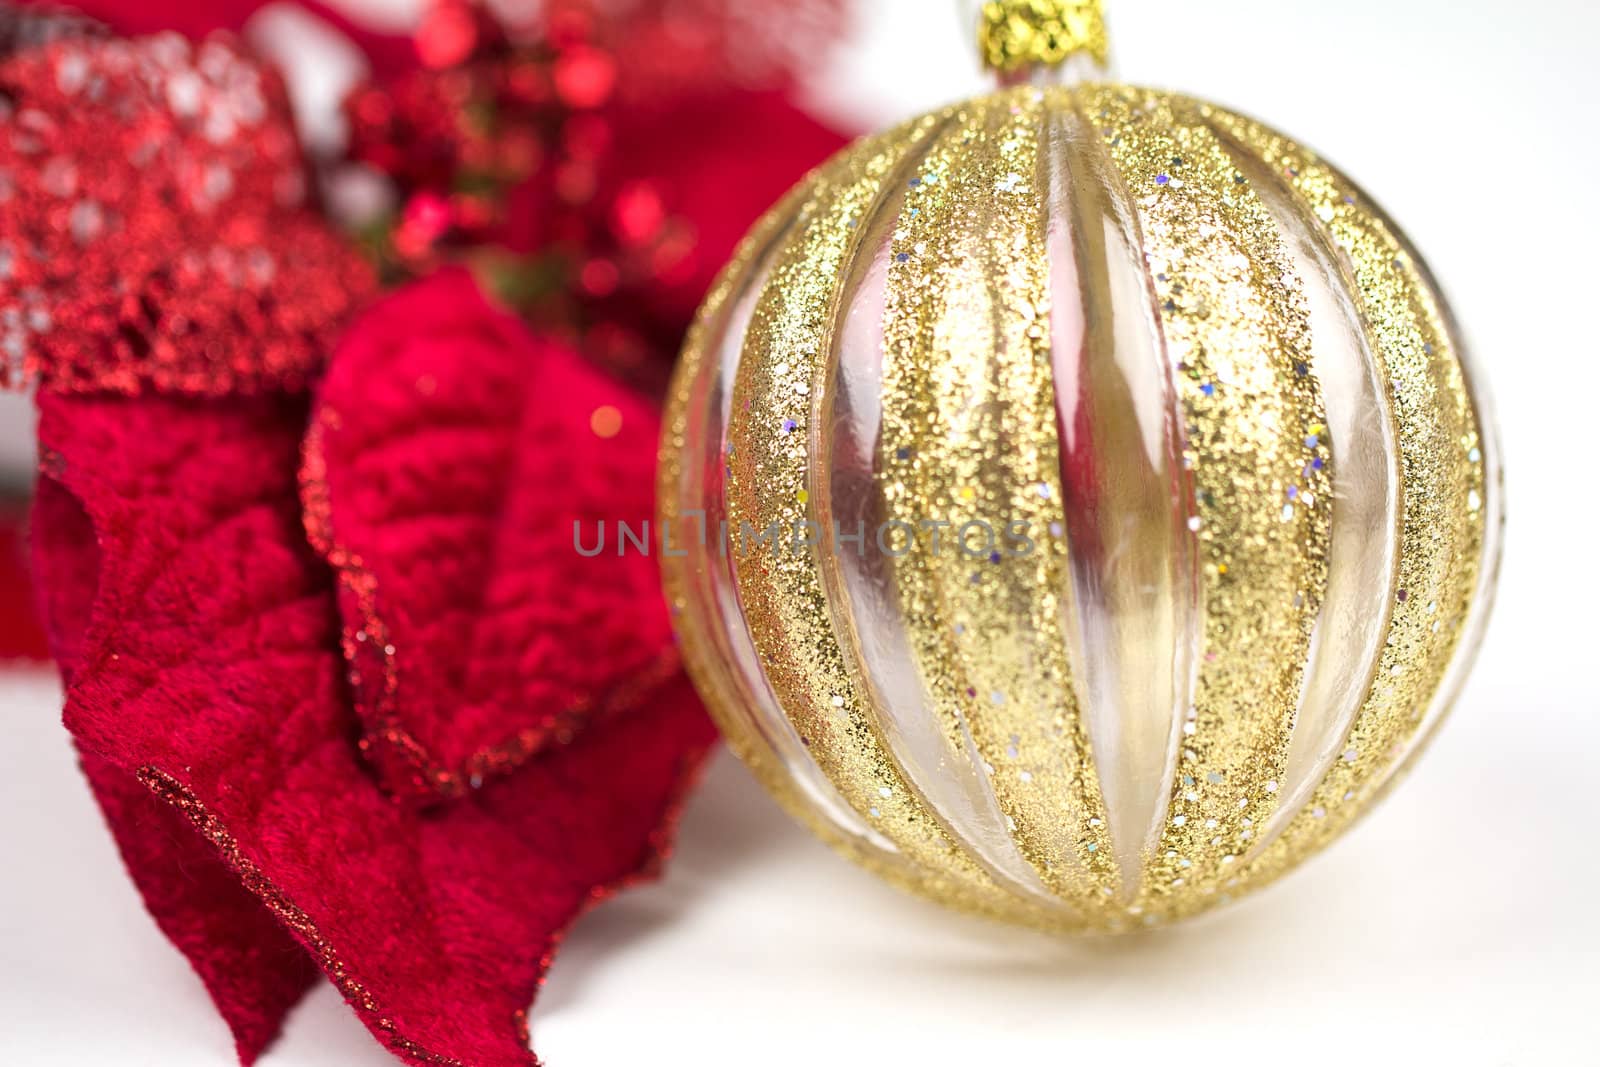 A vibrant red poinsettia with a gold decorated glass bauble